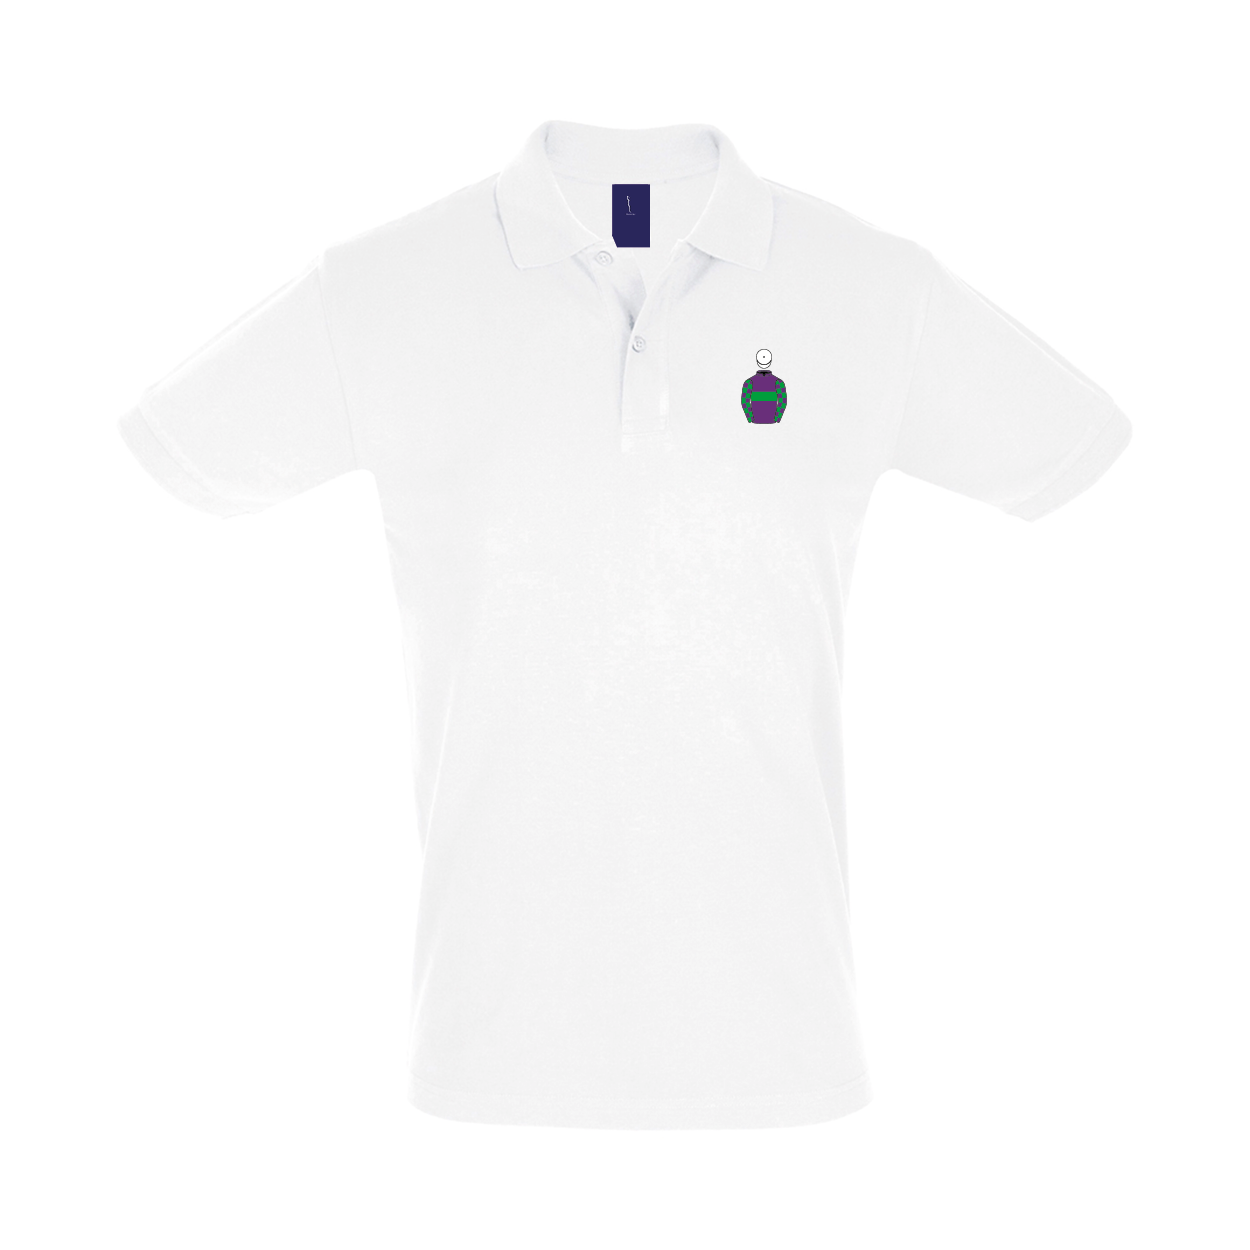 Ladies The Englands And Heywoods Embroidered Polo Shirt - Clothing - Hacked Up